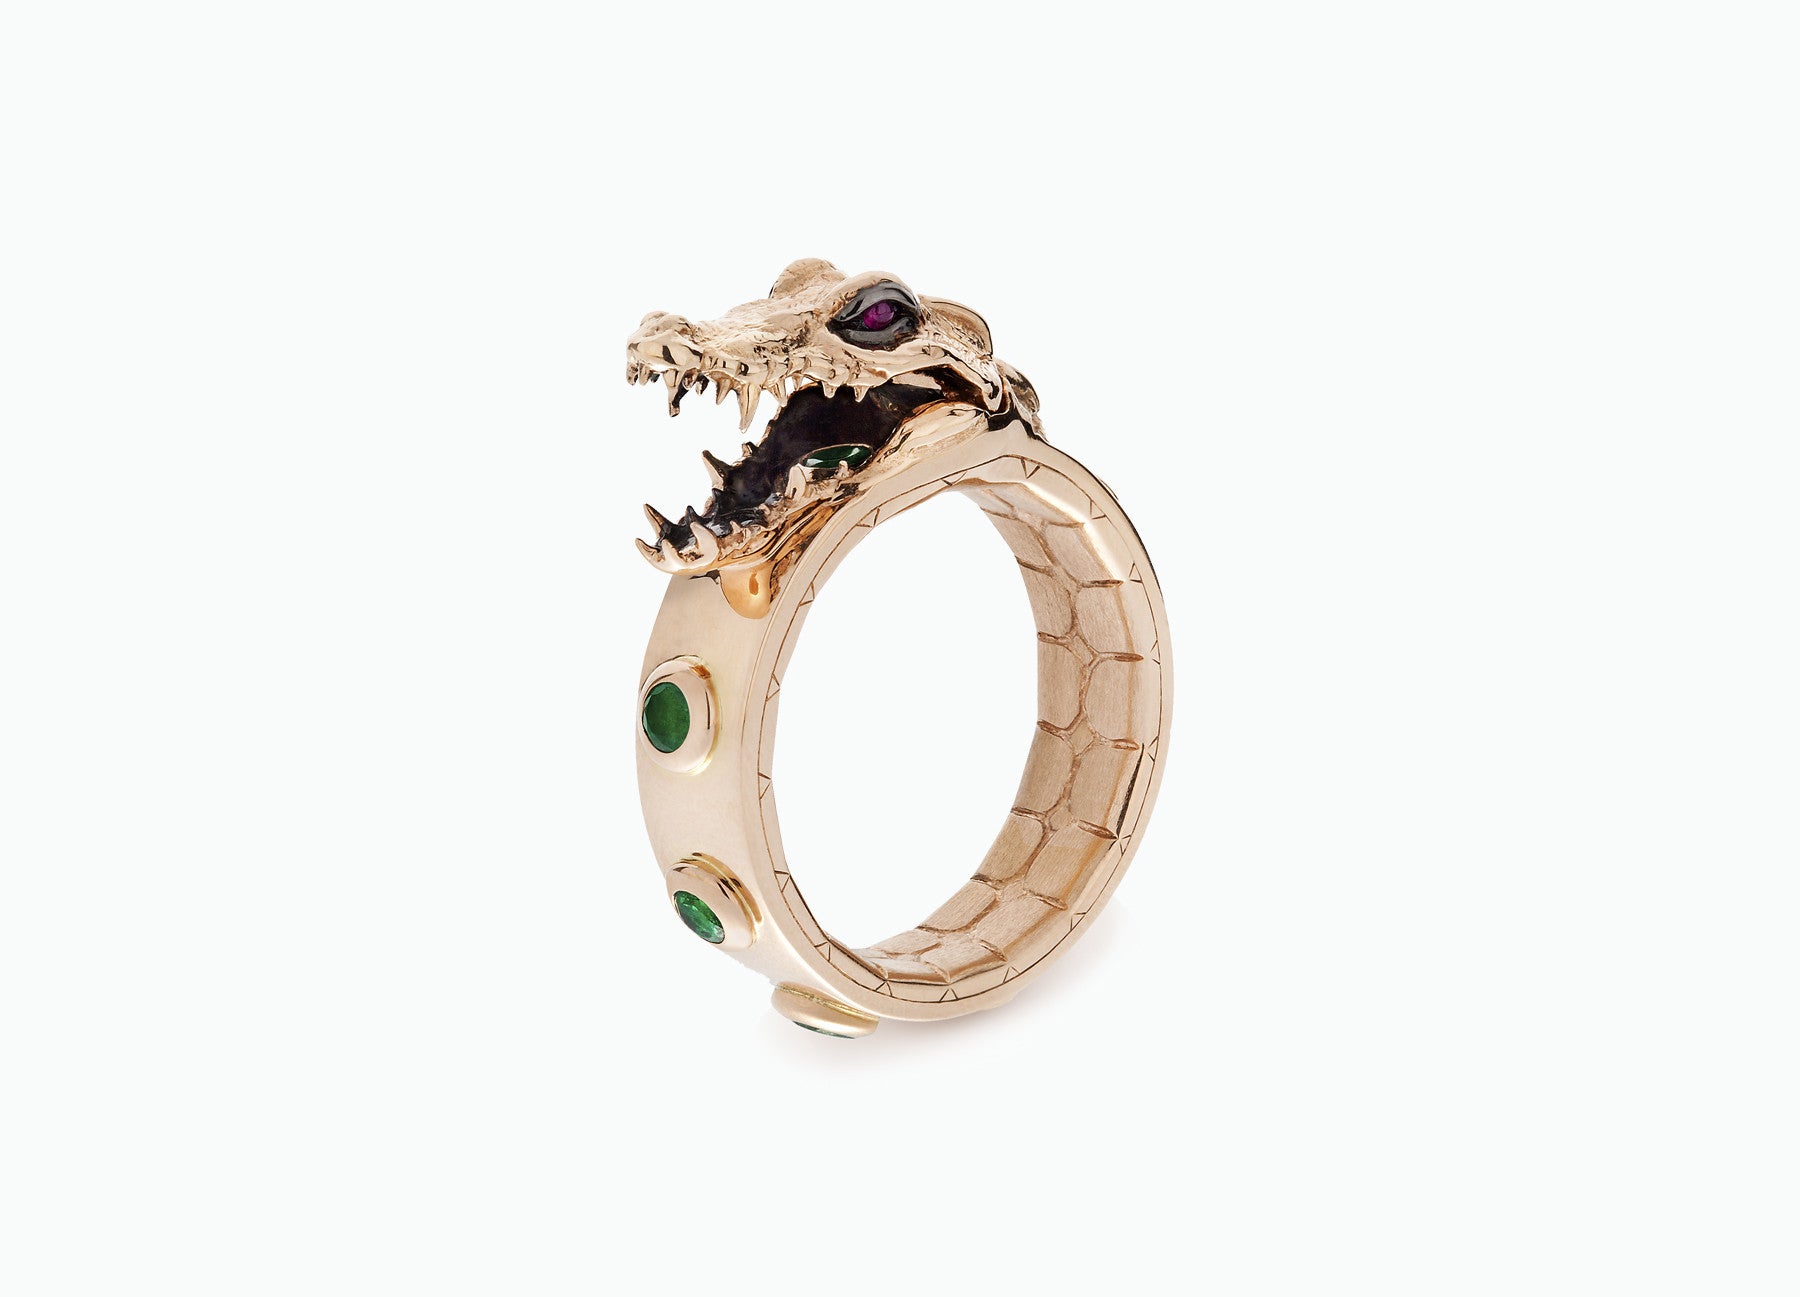 ONE OF A KIND CROCO RING